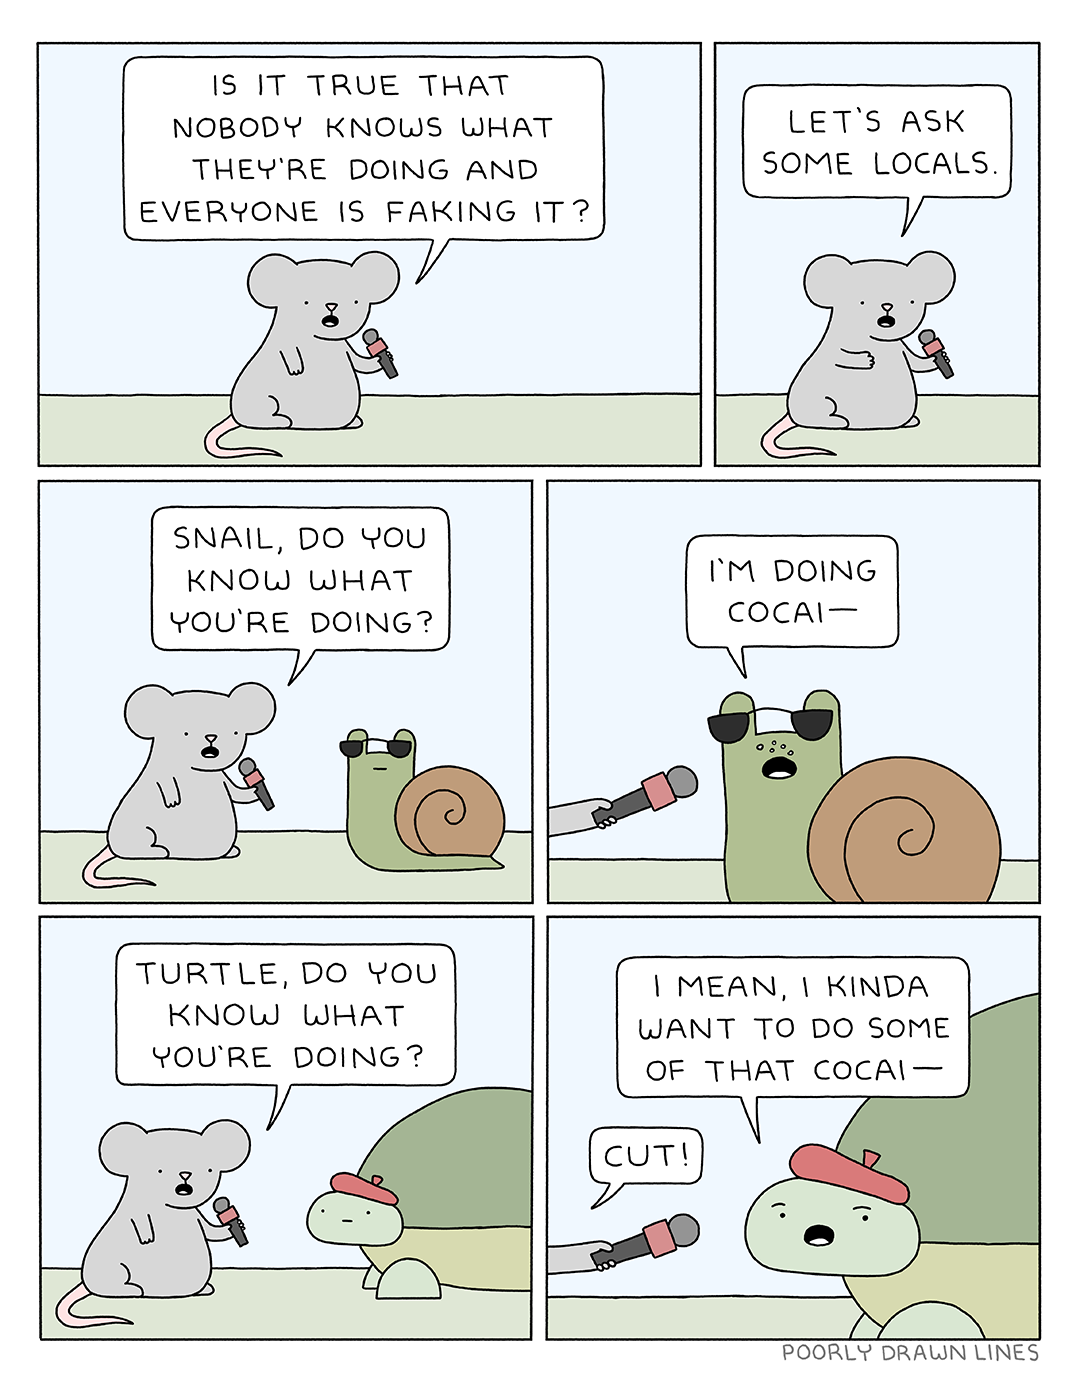 Poorly Drawn Lines – What you’re doing